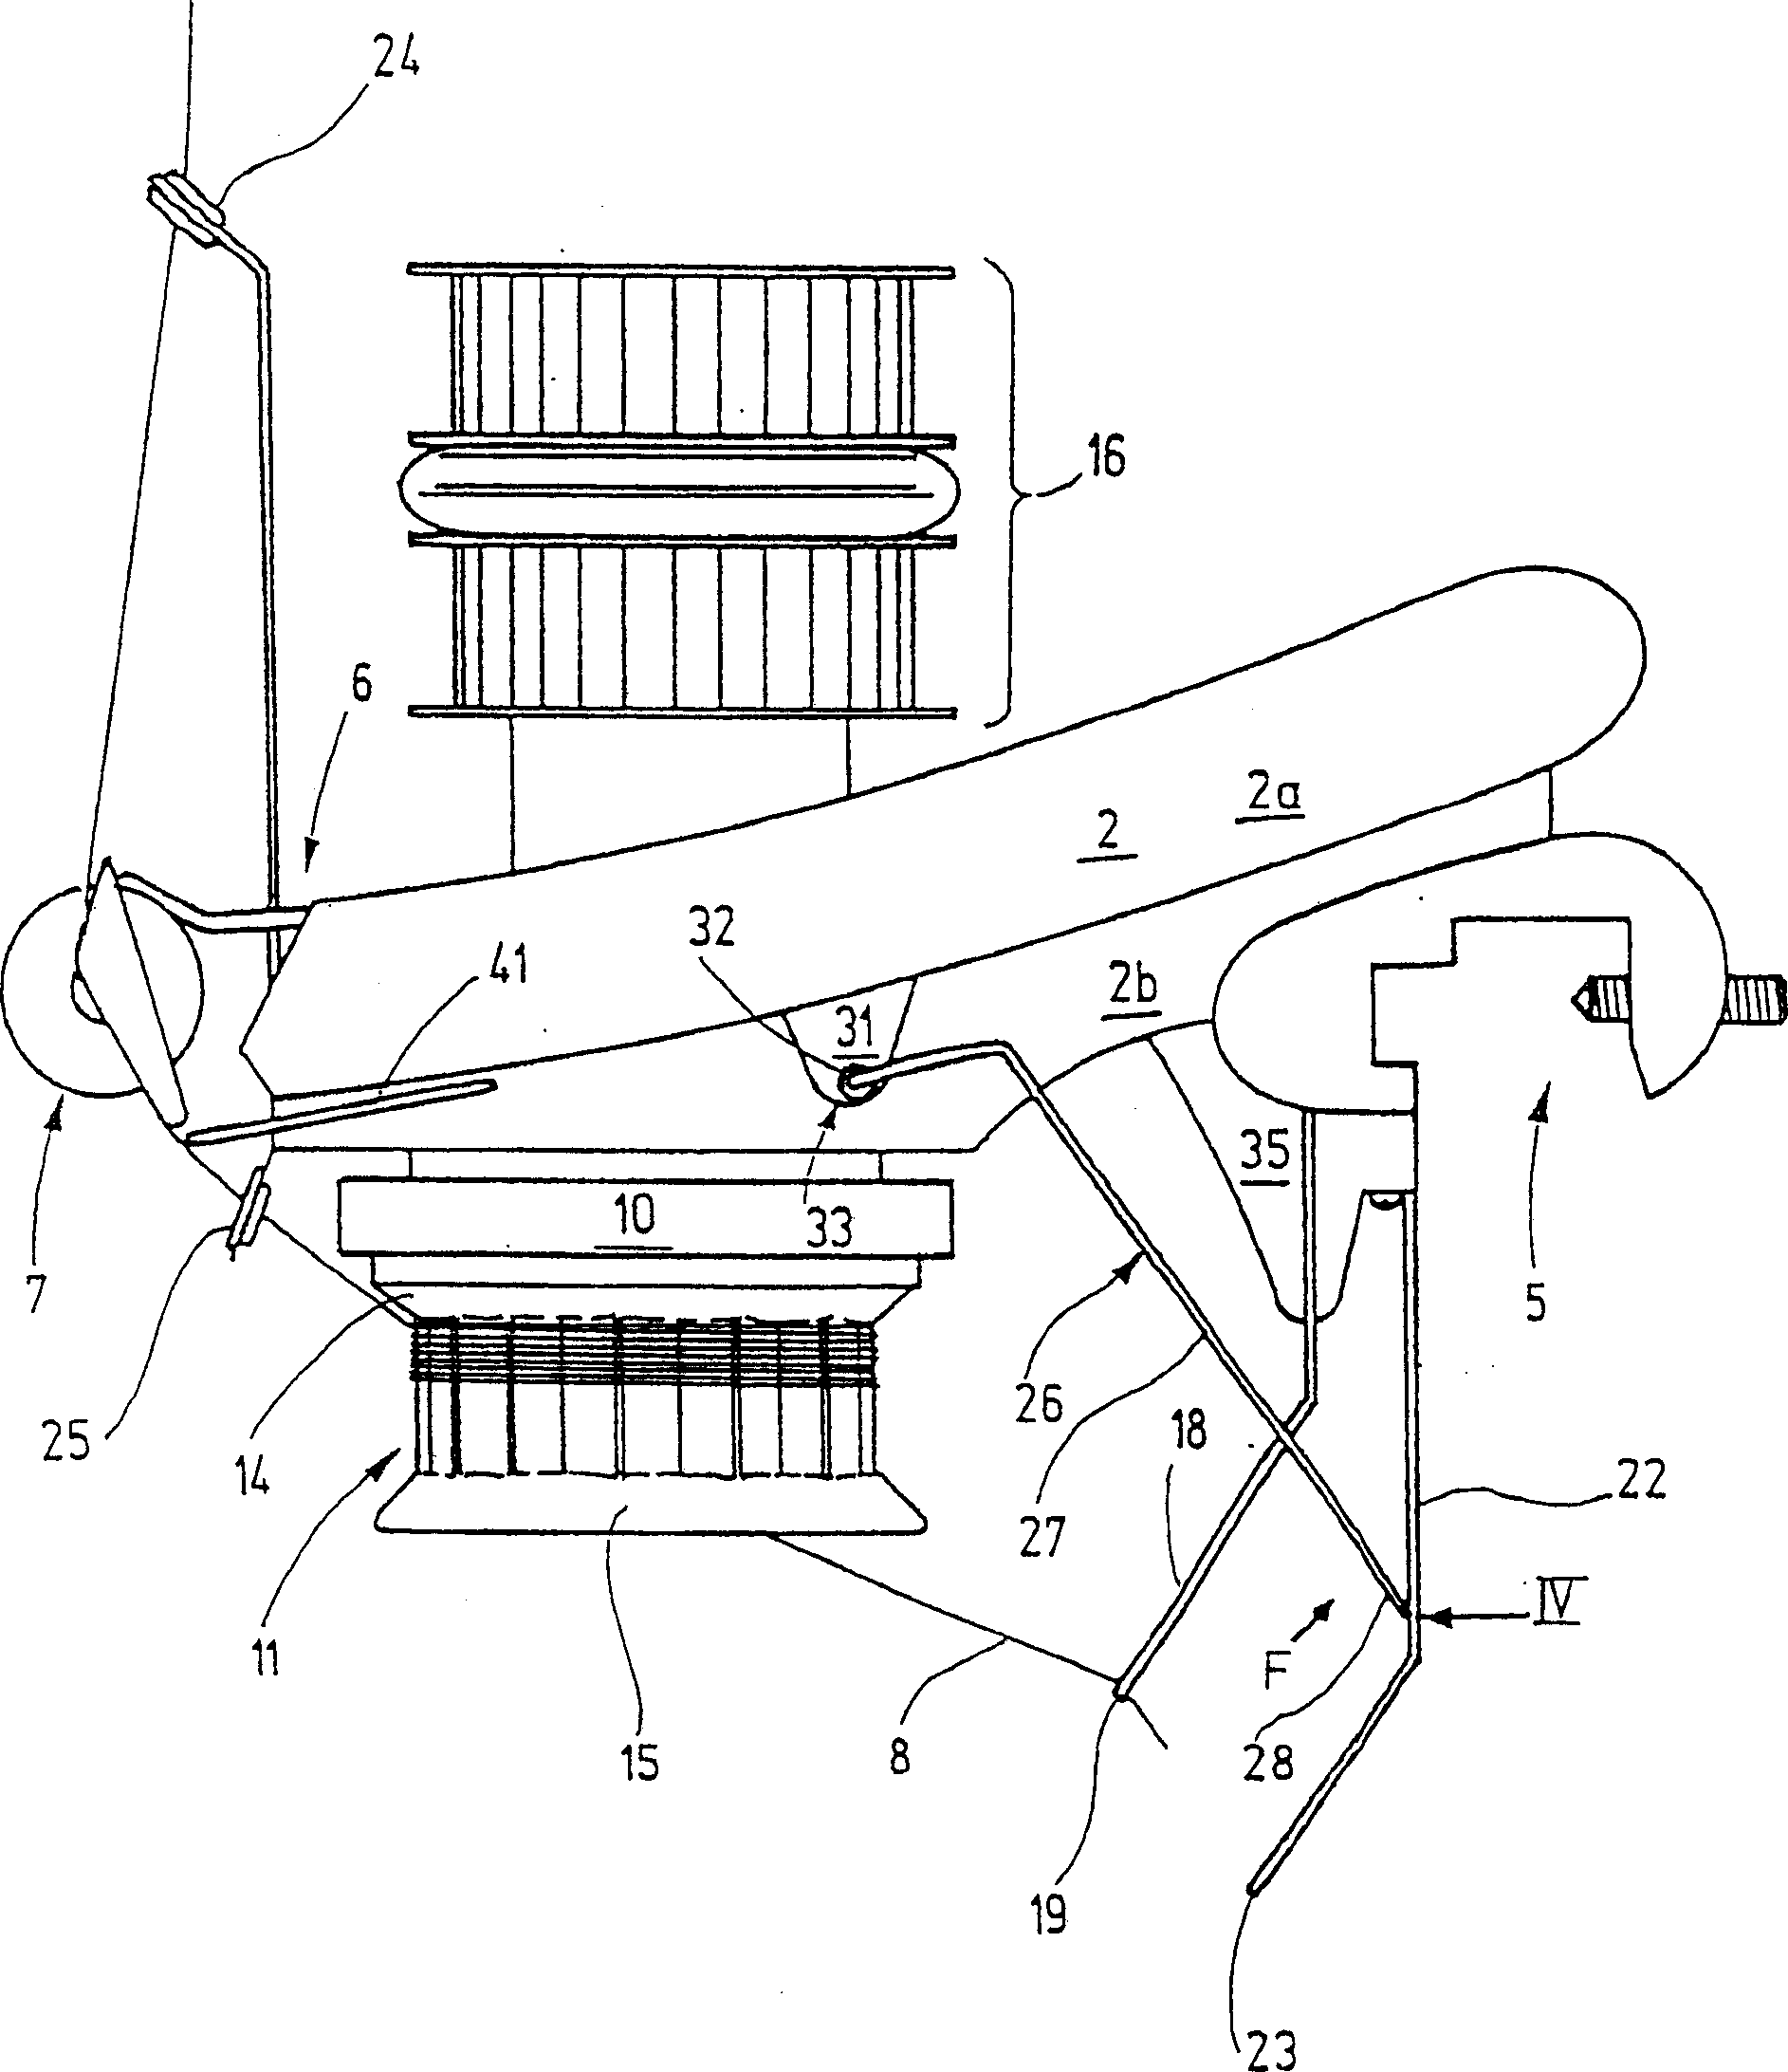 Thread feeding device comprising spring stop for thread detecting